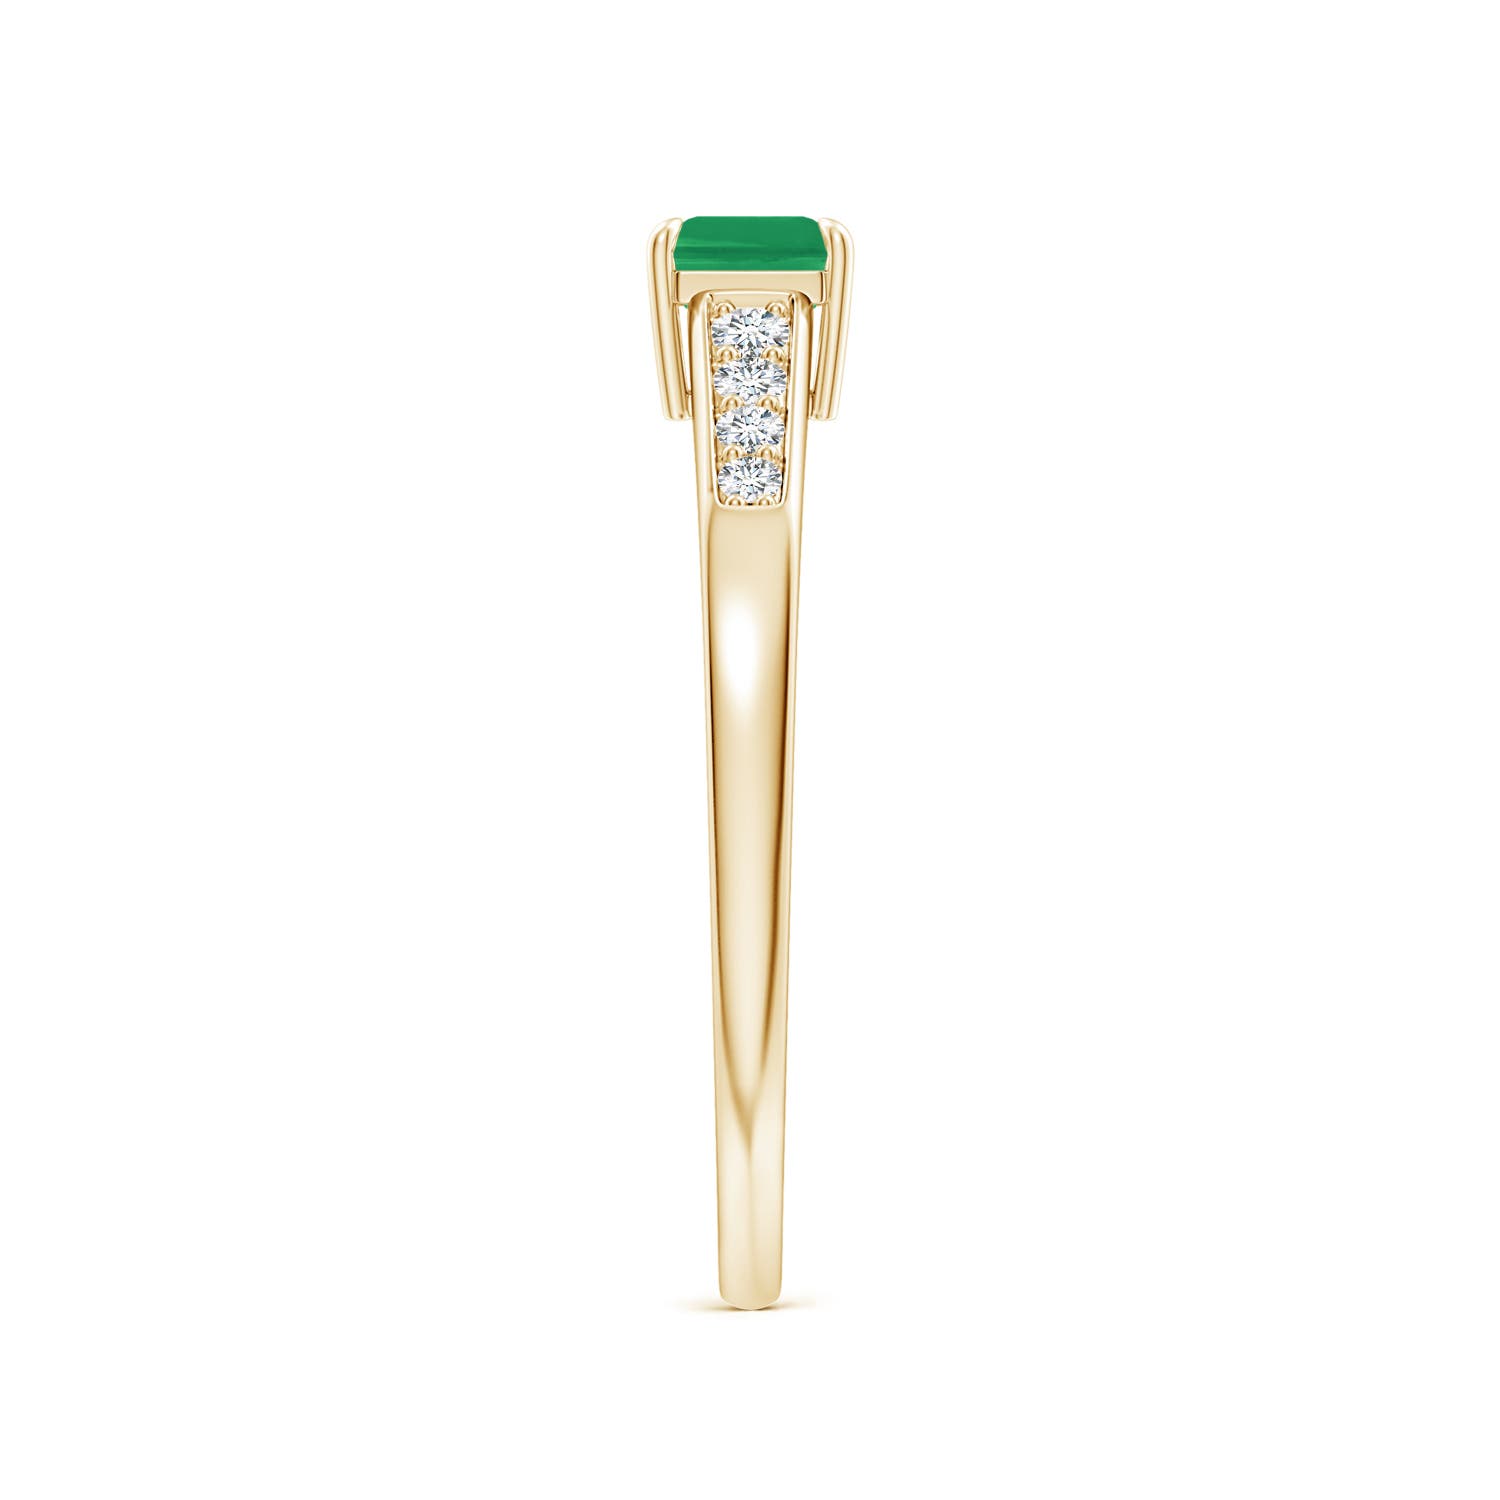 A - Emerald / 0.61 CT / 14 KT Yellow Gold